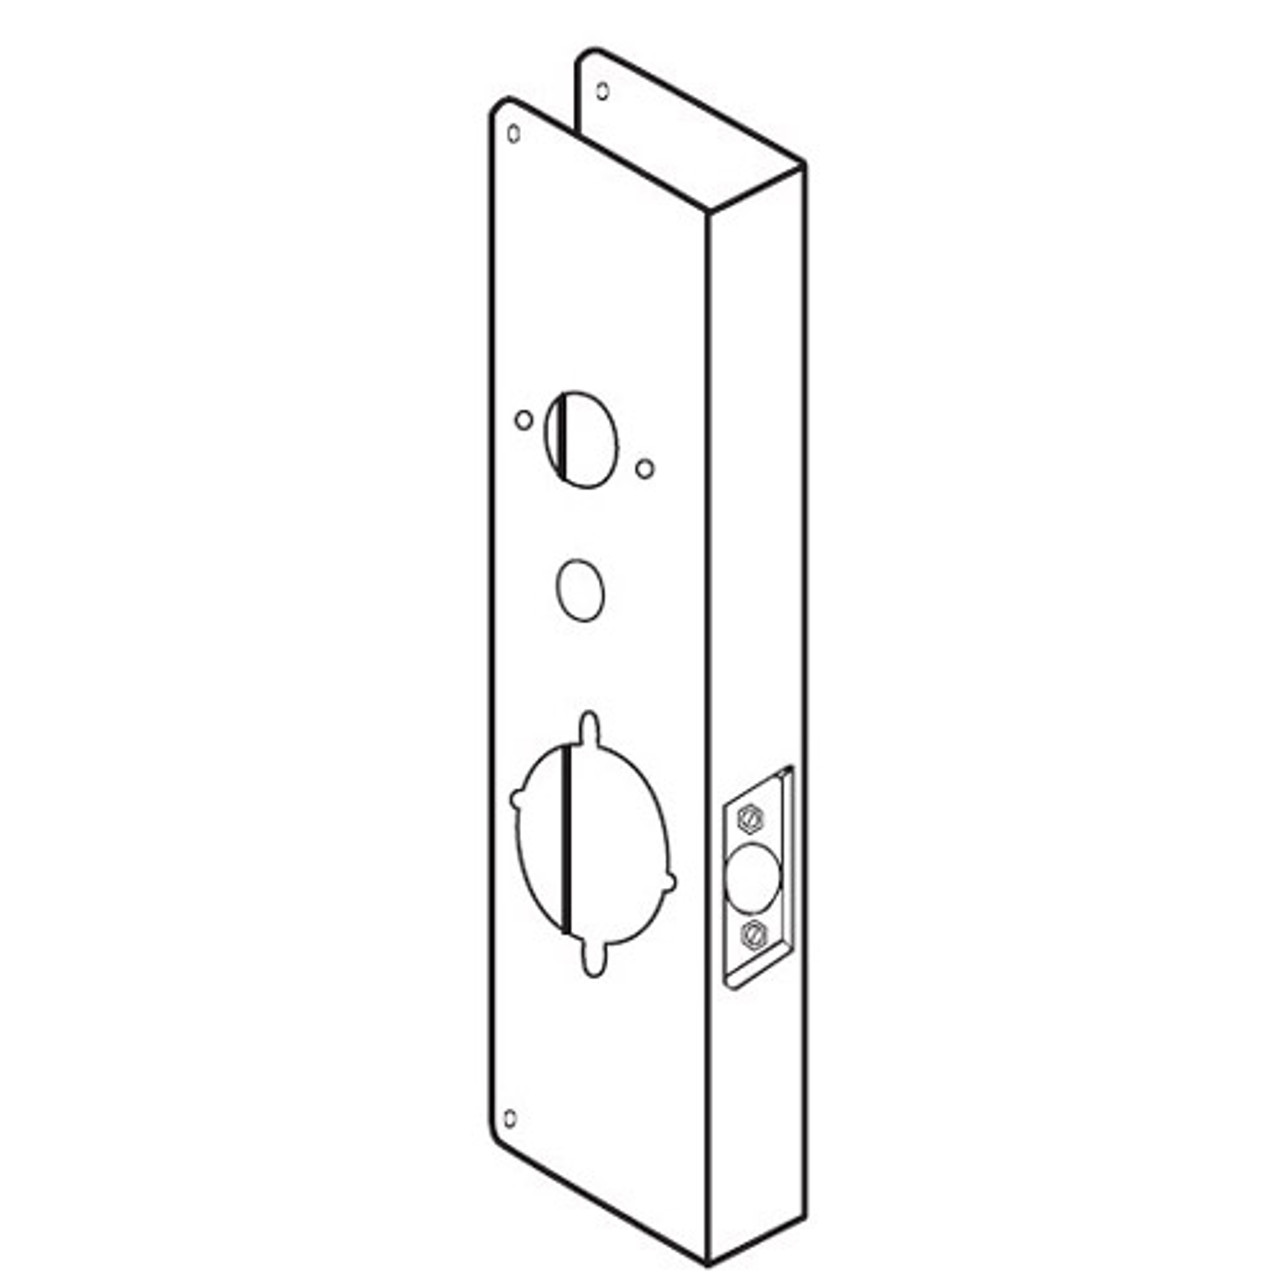 27-PB-CW Don Jo Wrap-Around Plate for Alarm Lock 2700/T2, 3000 and DL 4100 series Trilogy Lock